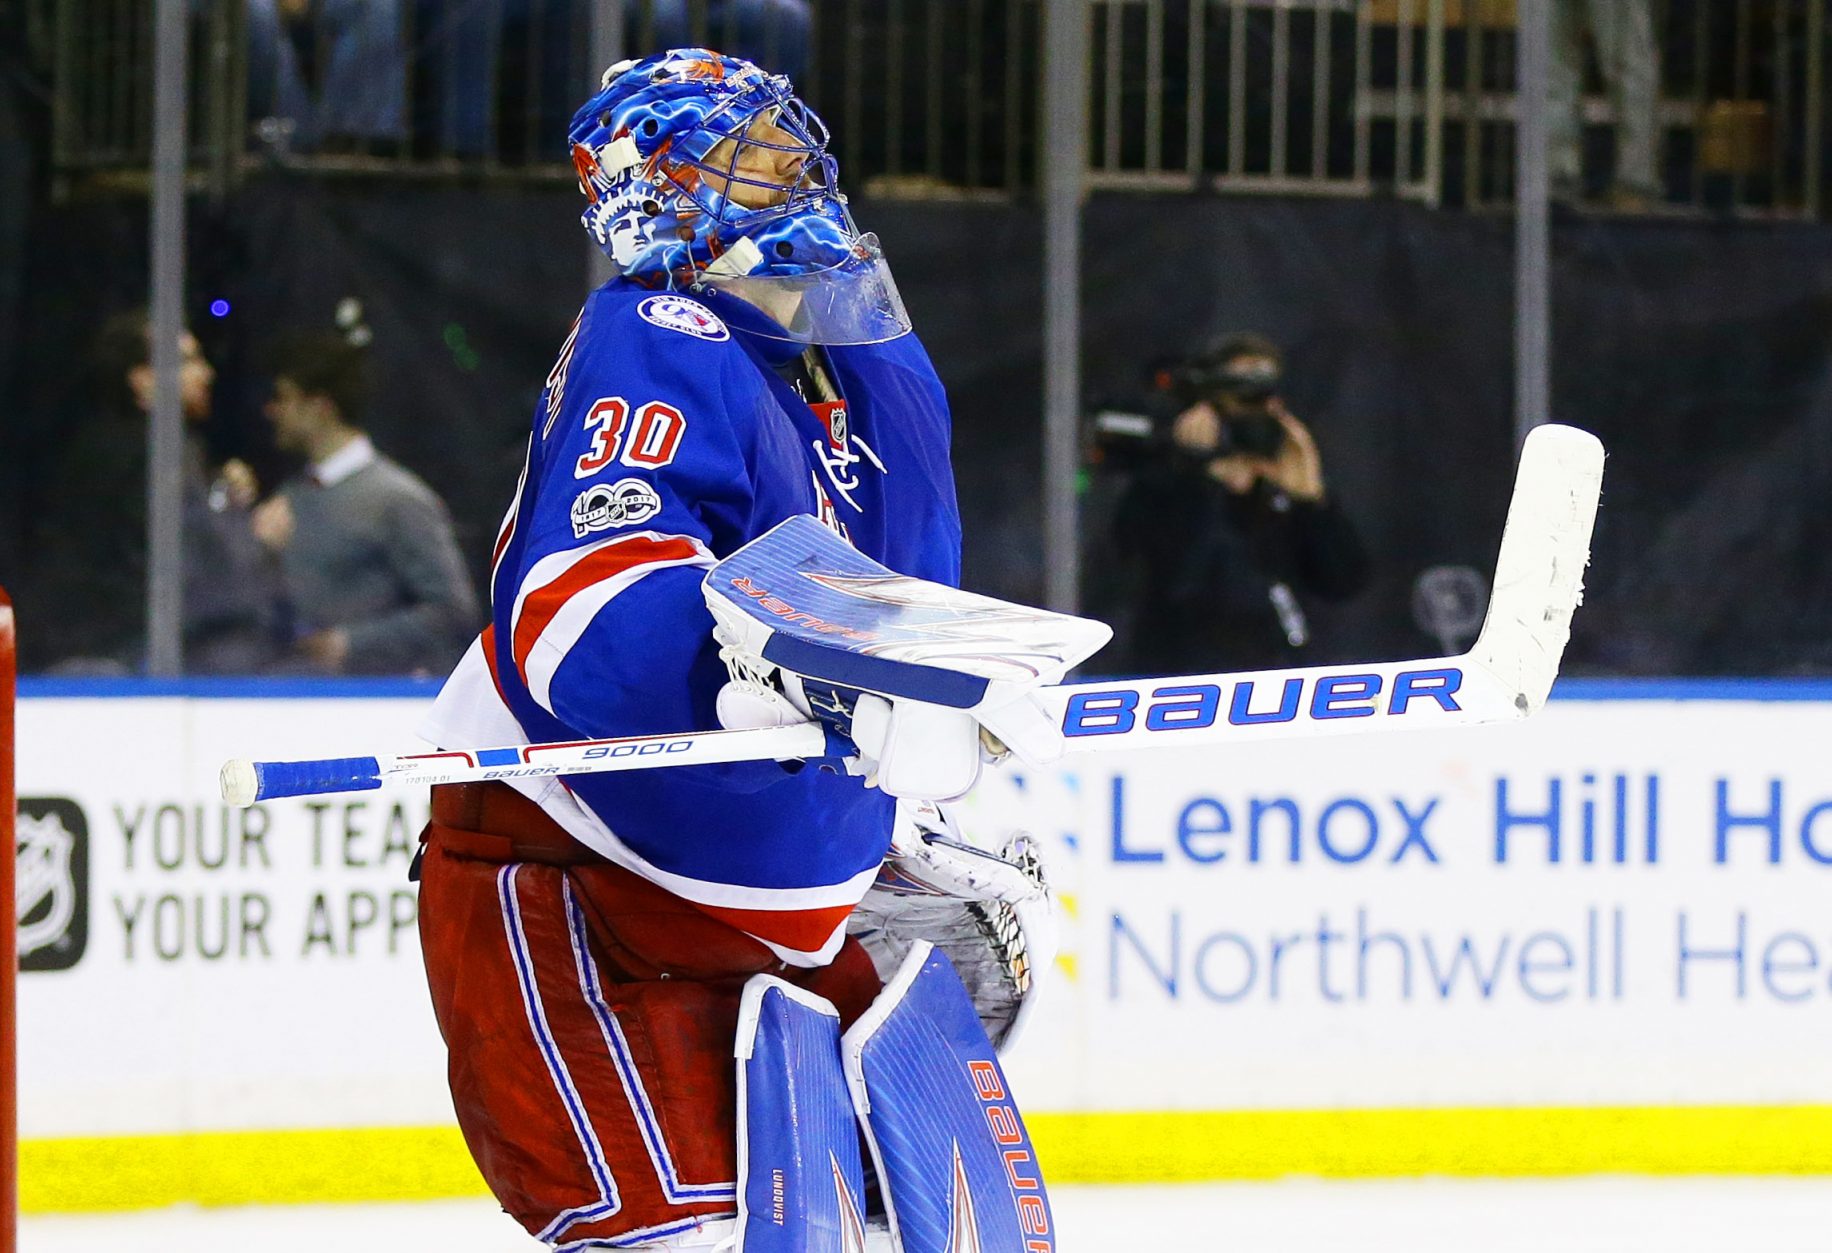 Henrik Lundqvist shines as New York Rangers take out Kings at MSG (Highlights) 1